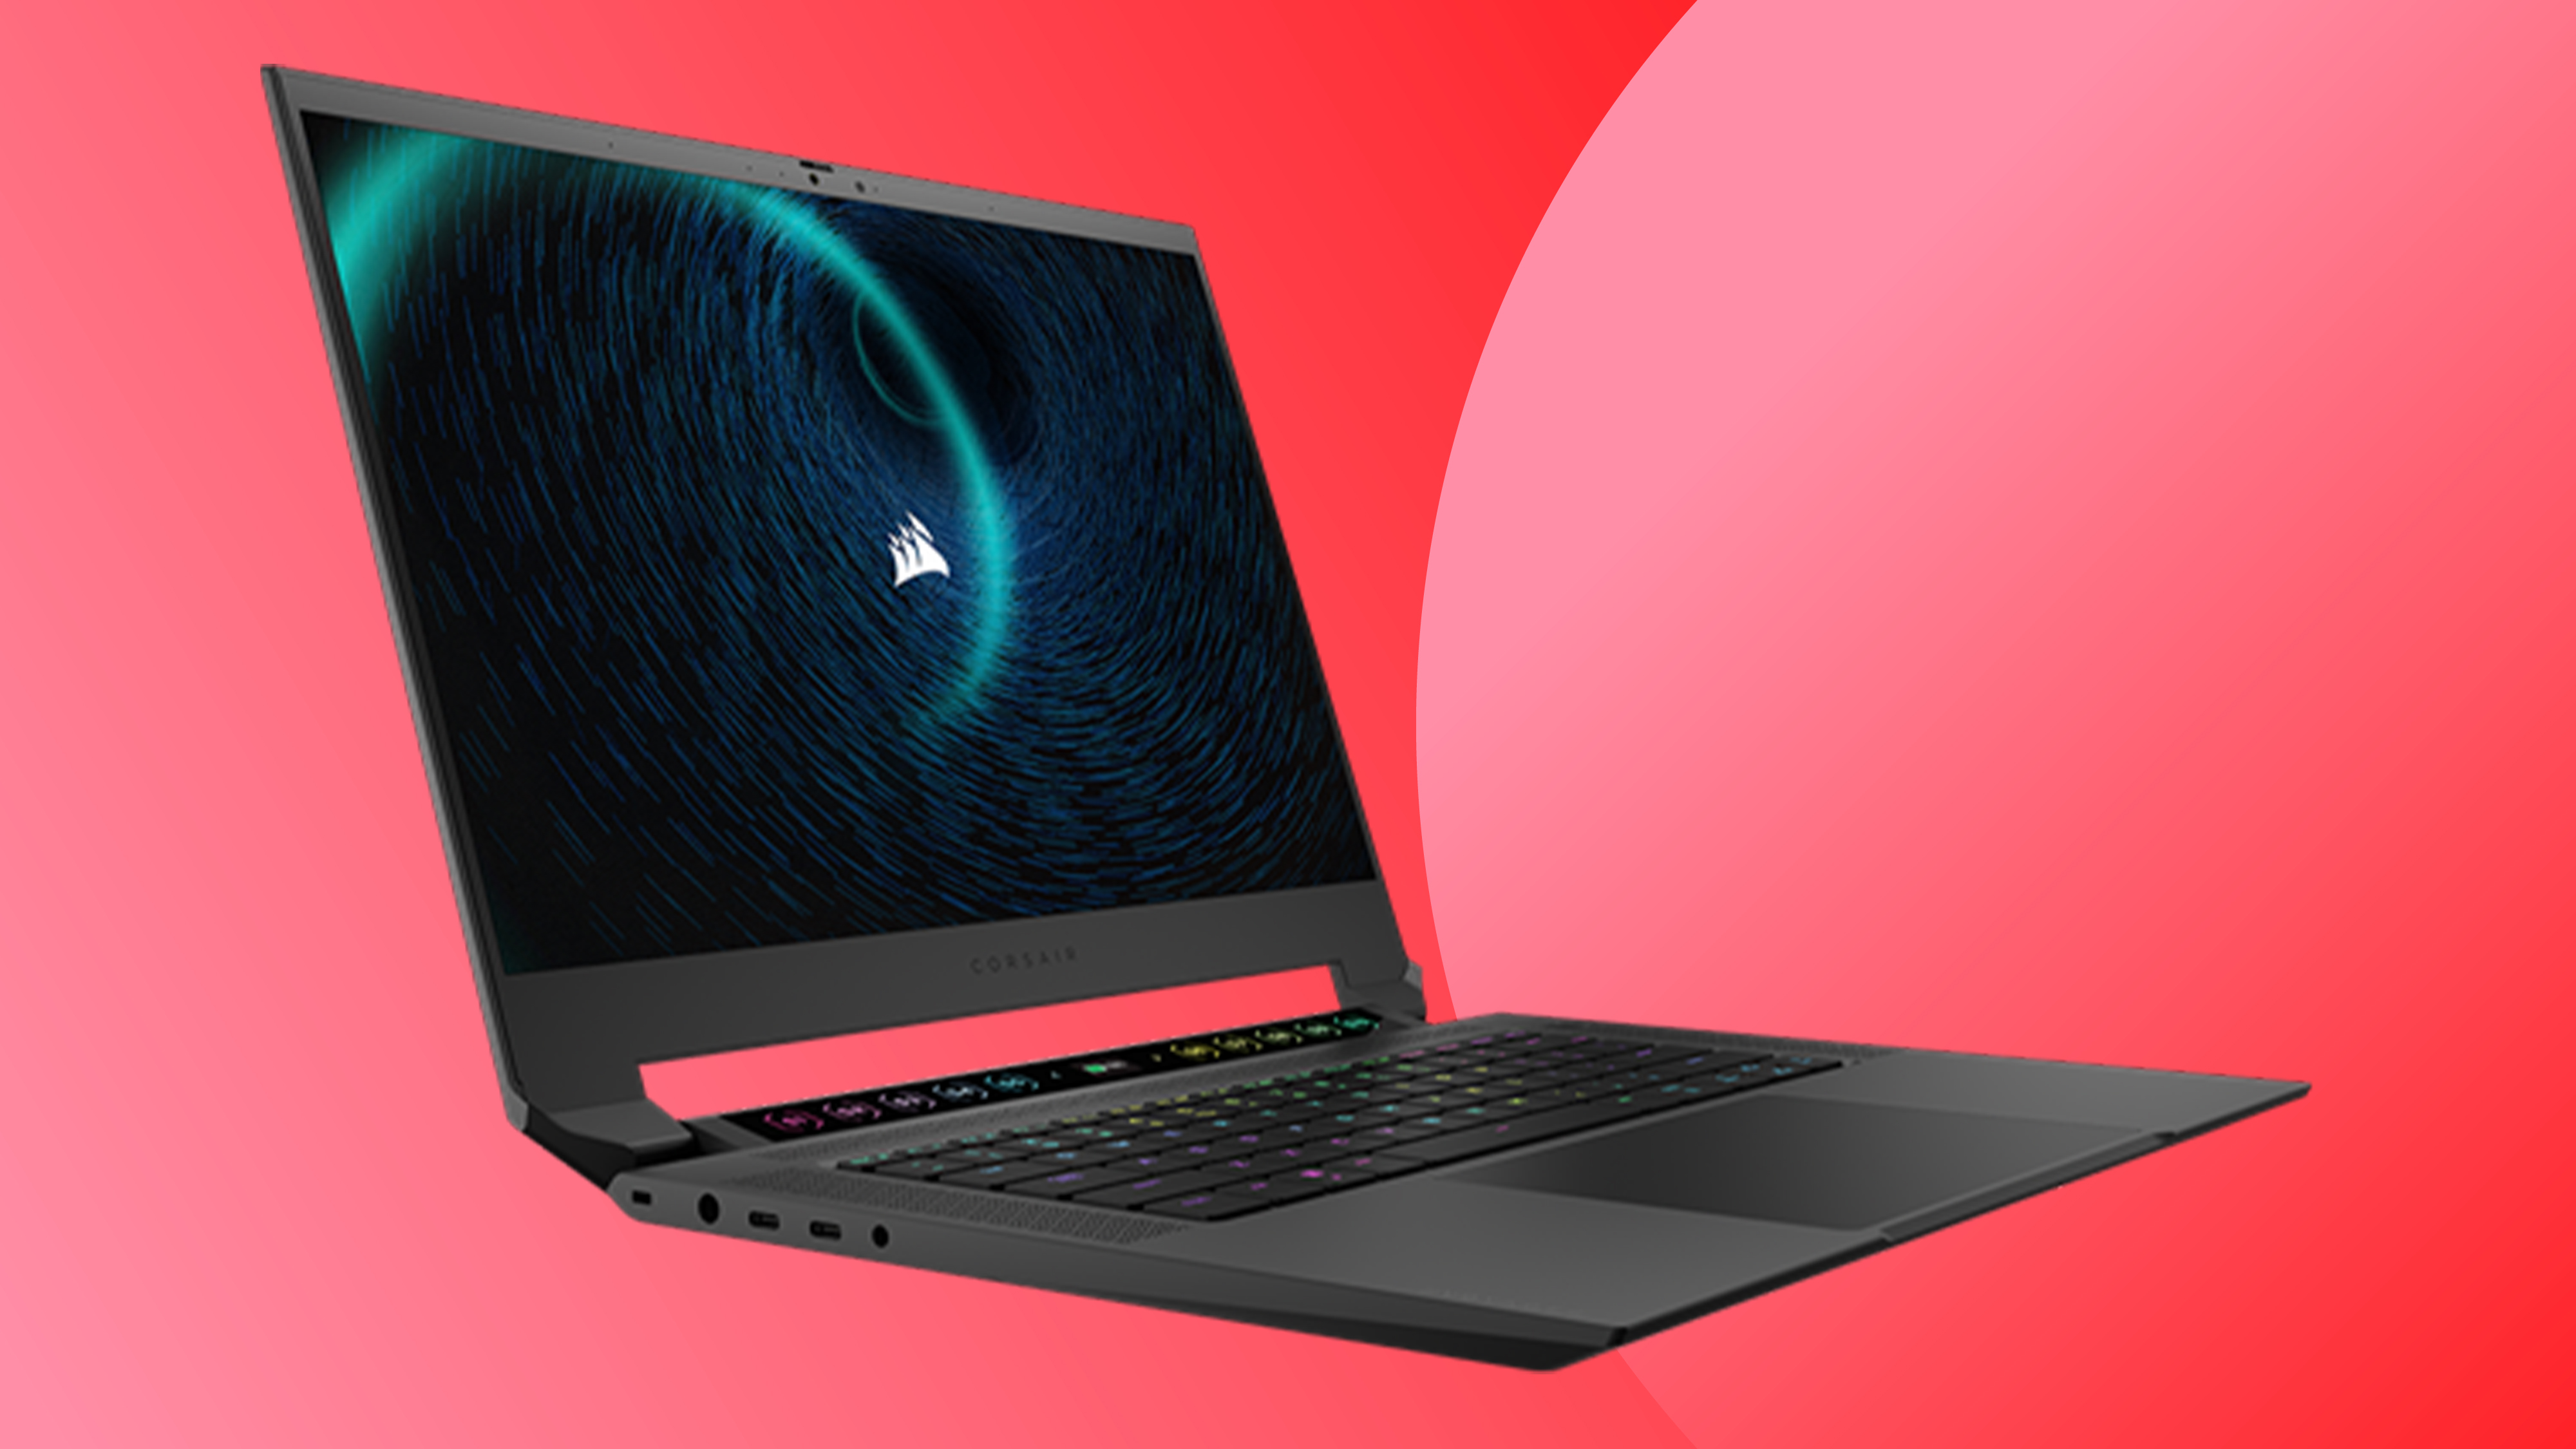 A Corsair Cyber Monday deals image with a Corsair Voyager a1600 gaming laptop on a red background